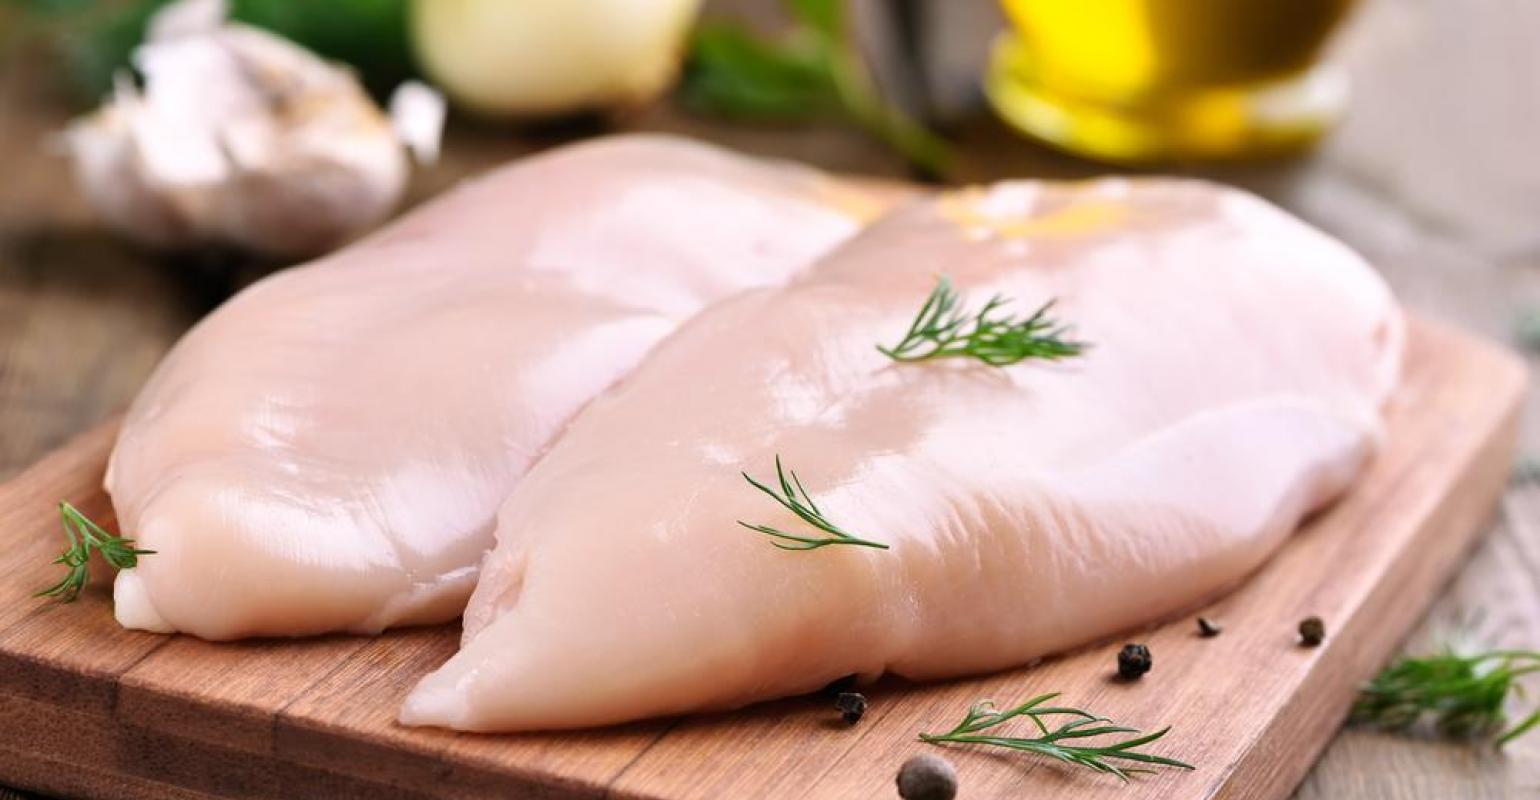 From January to November 2021, Brazil exported 4.199 million tons of poultry meat.